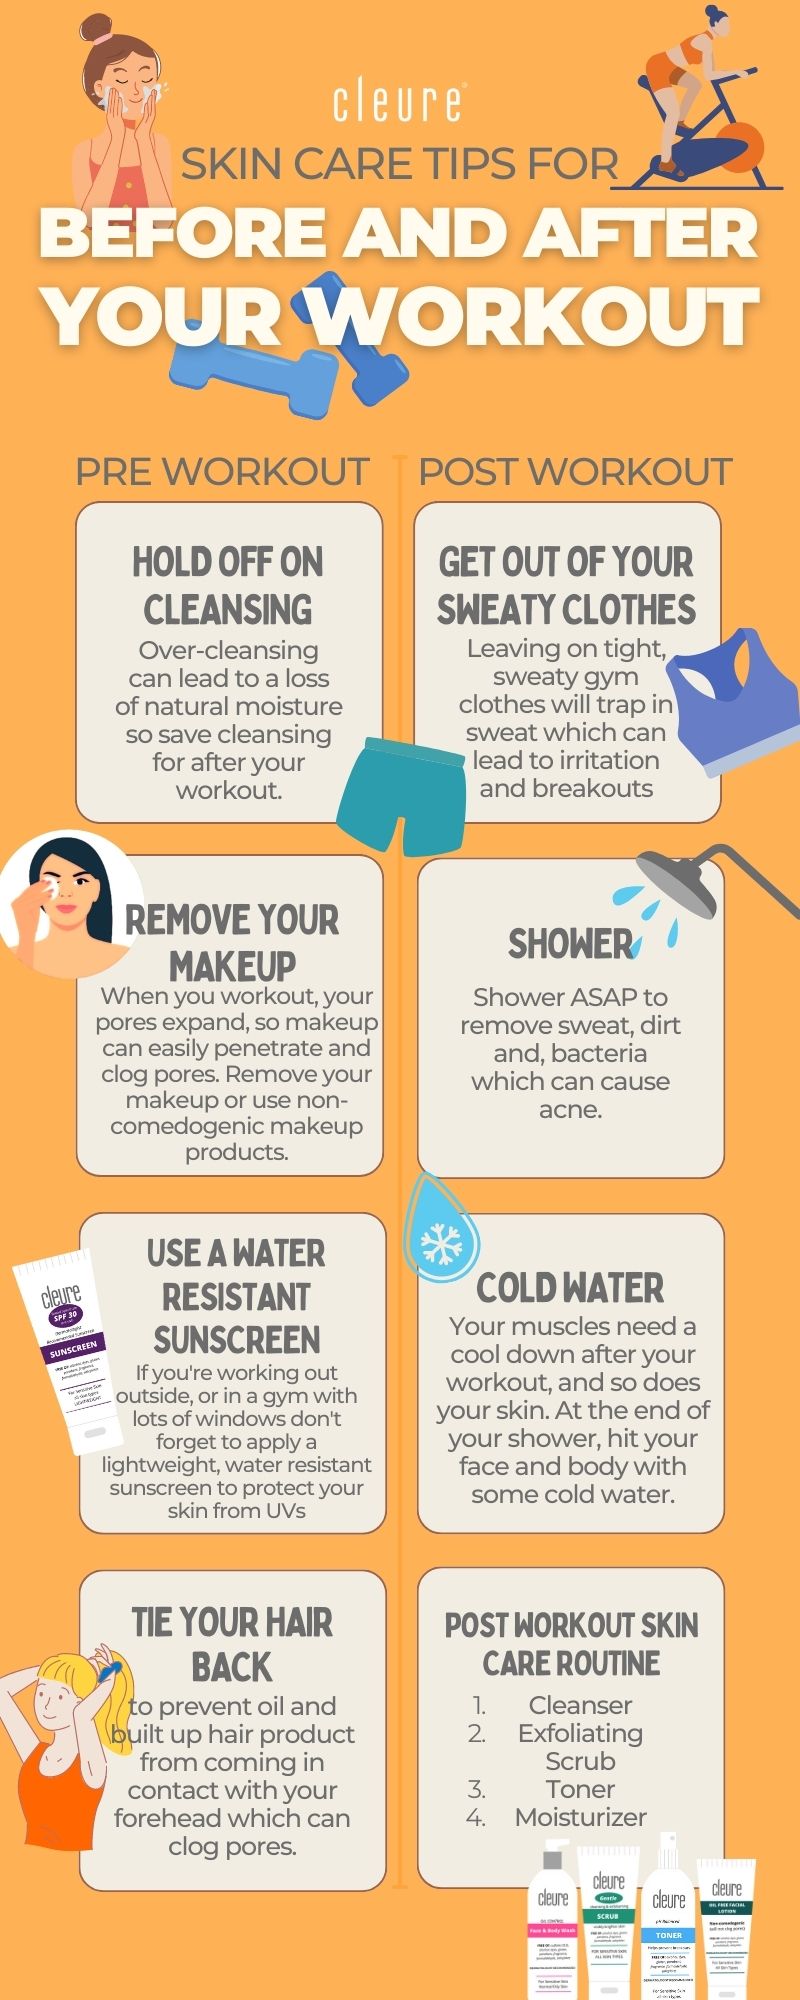 https://cdn.shopify.com/s/files/1/0471/5780/5213/files/pre_and_post_workout_skin_care_routine_infographic.jpg?v=1663268873